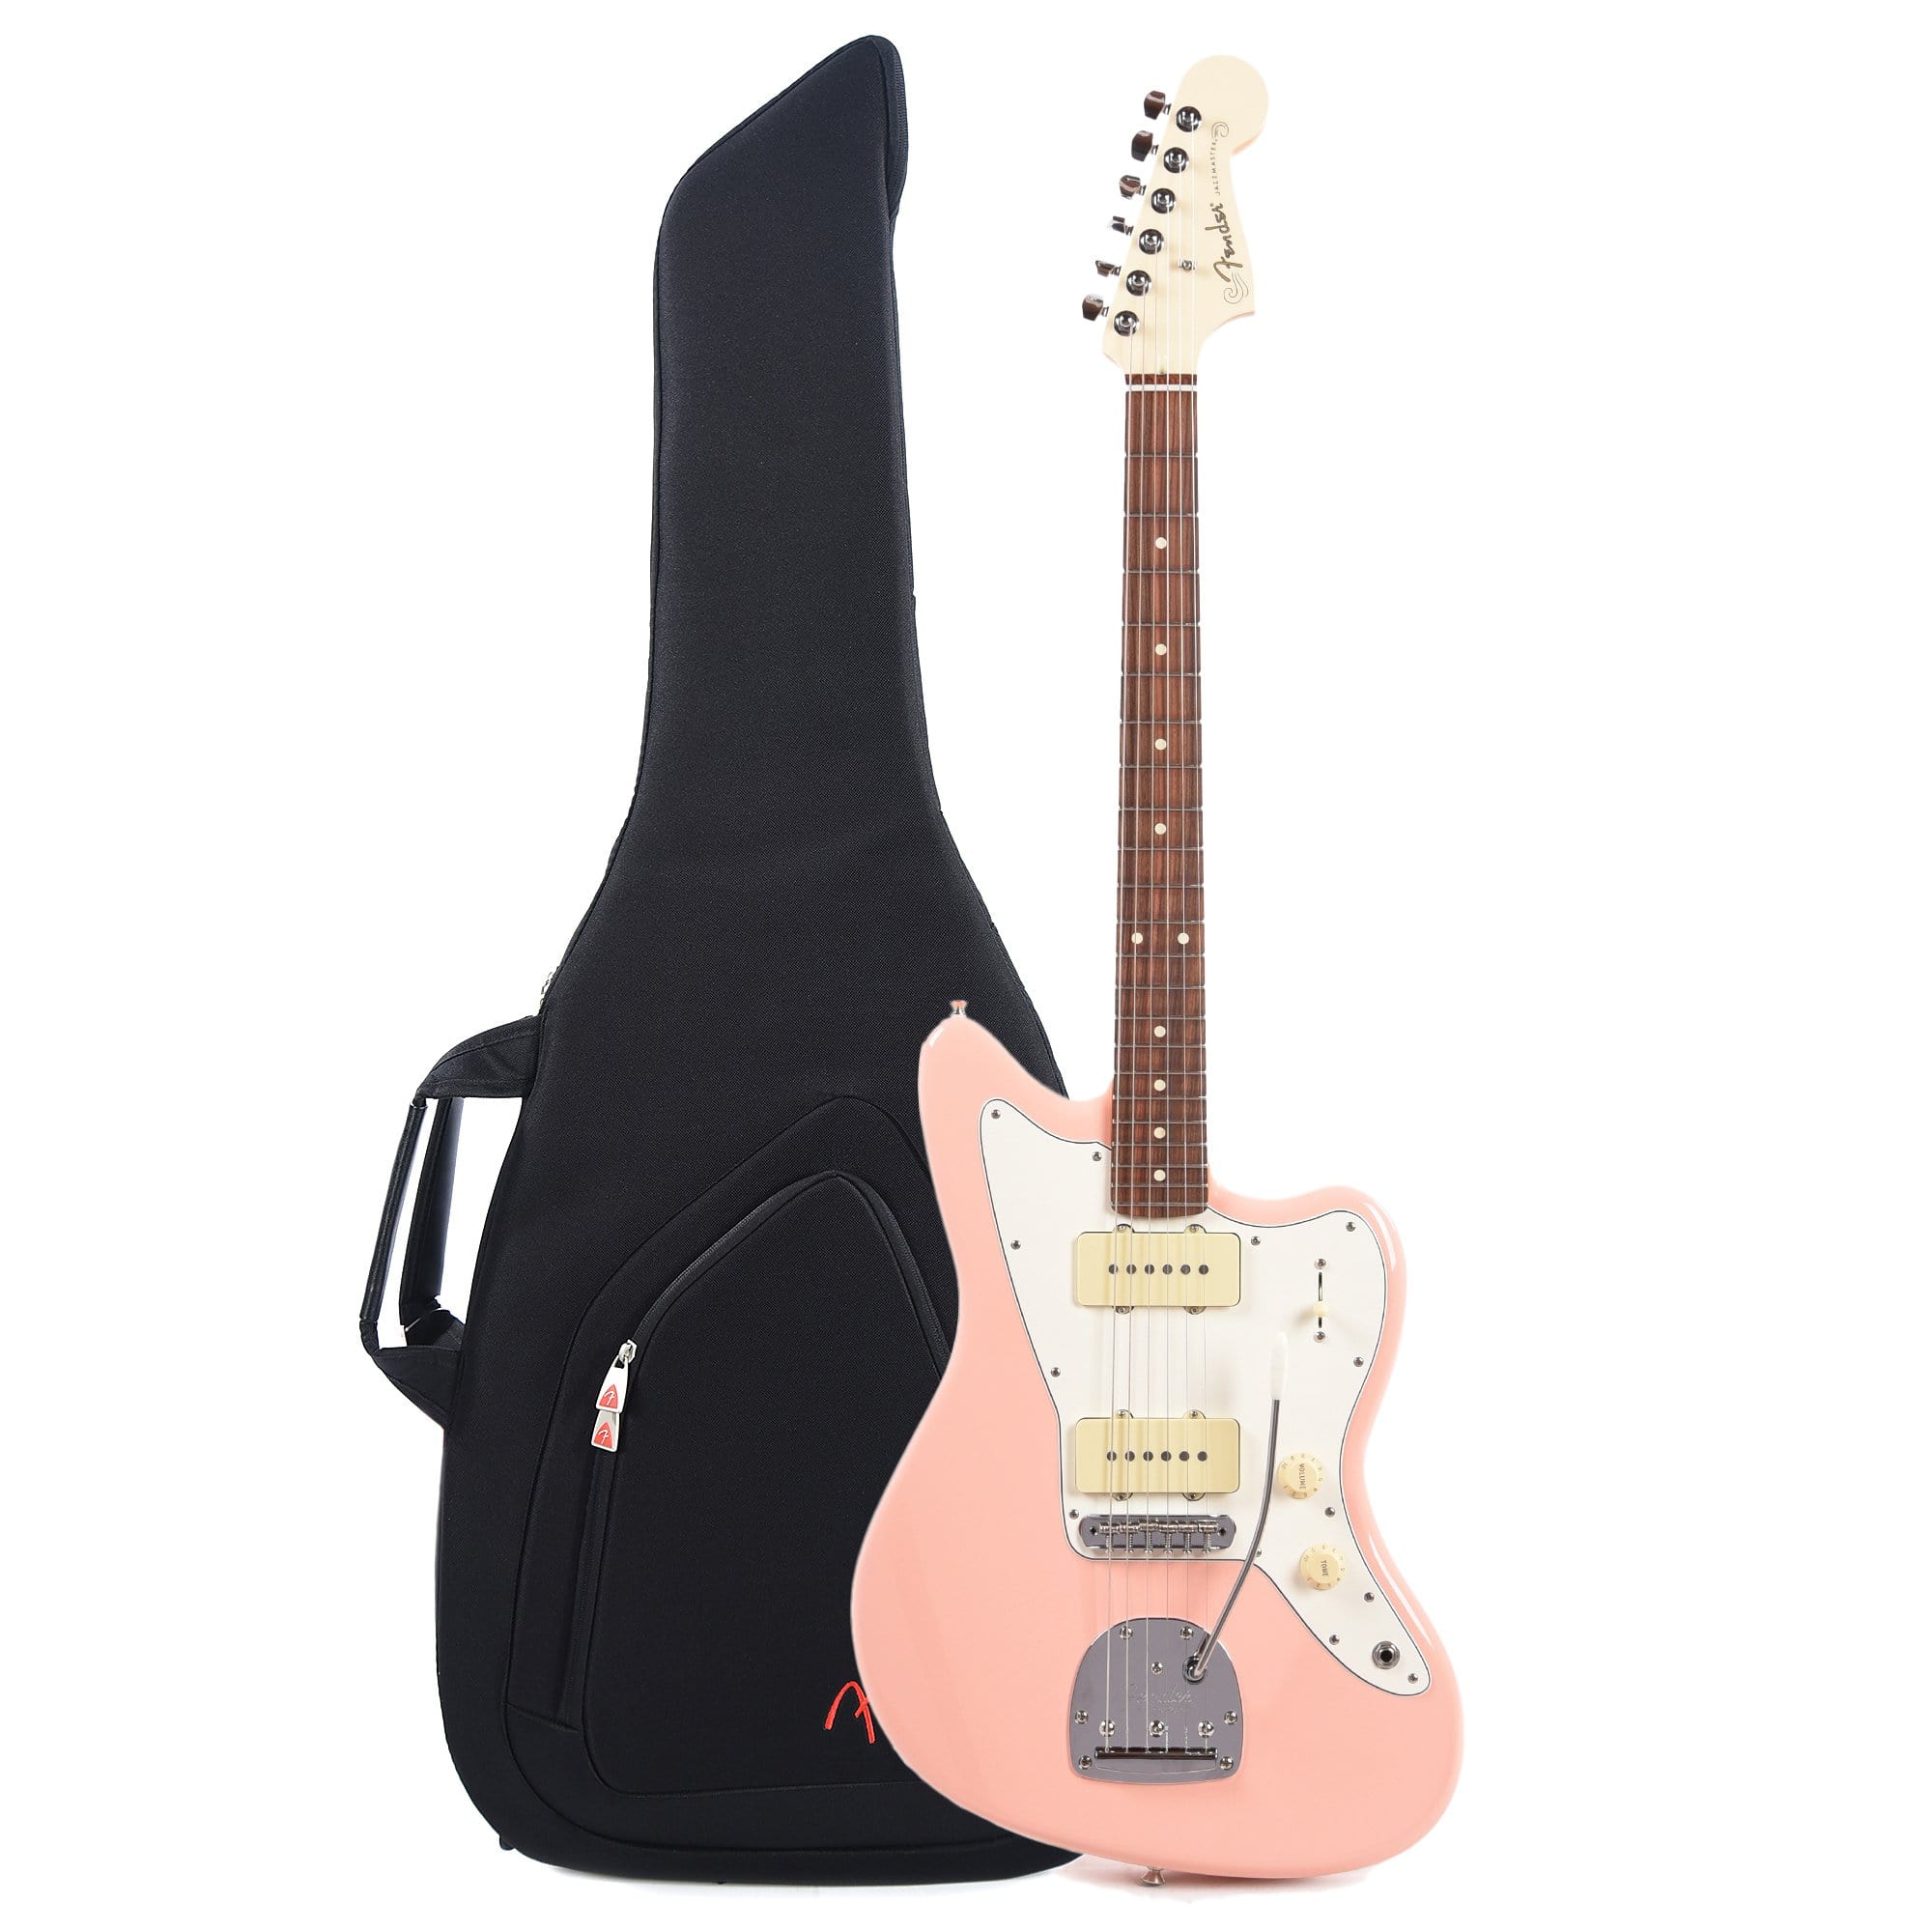 Fender Player Jazzmaster Shell Pink w/Olympic White Headcap, Pure Vintage  '65 Pickups, & Series/Parallel 4-Way and Gig Bag Bundle